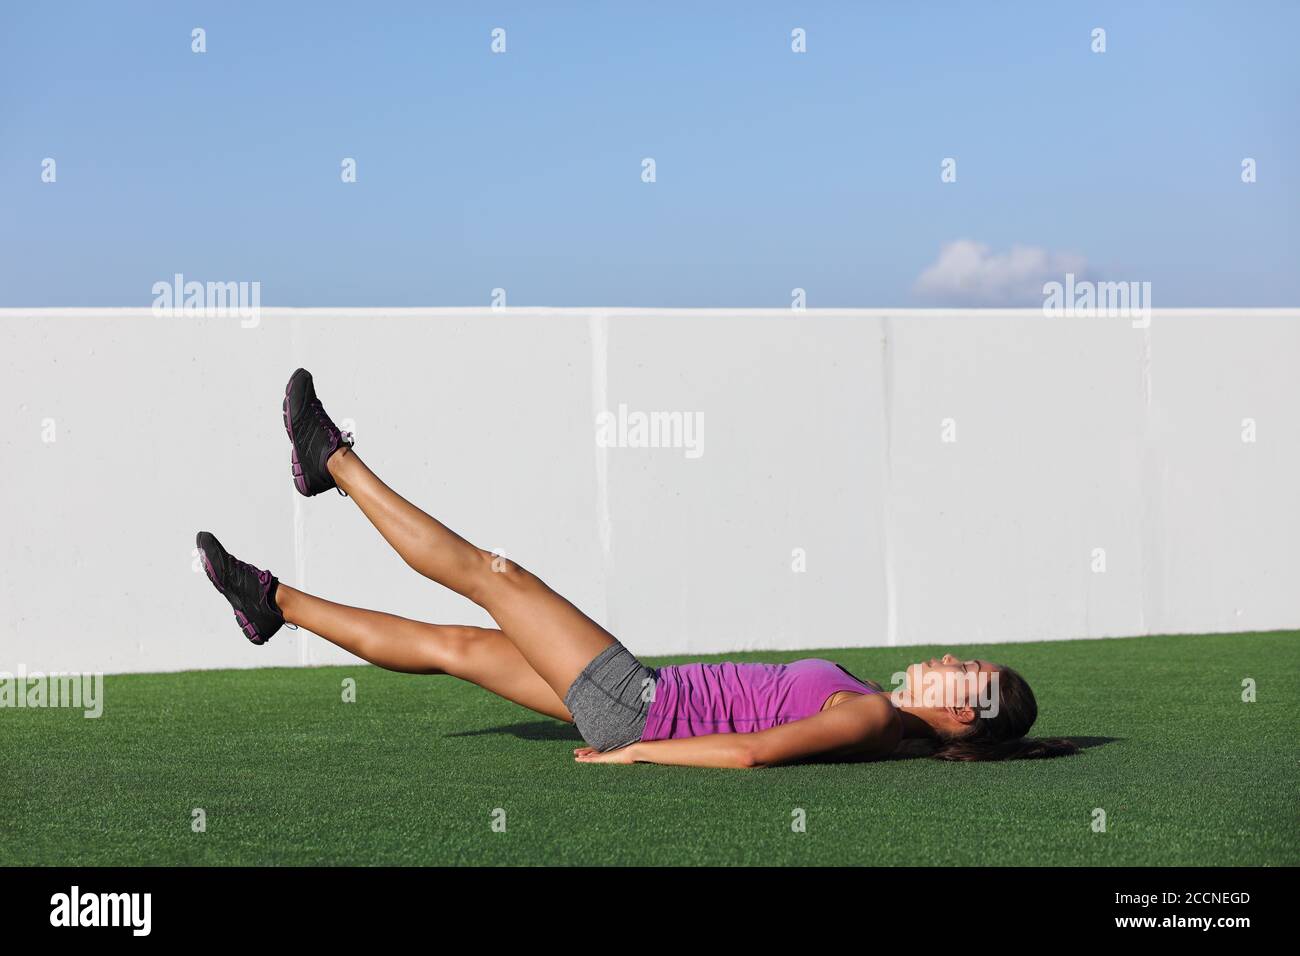 Fitness woman training abs workout doing scissor lifts leg raise or flutter kicks exercise out outdoor grass floor at gym Stock Photo